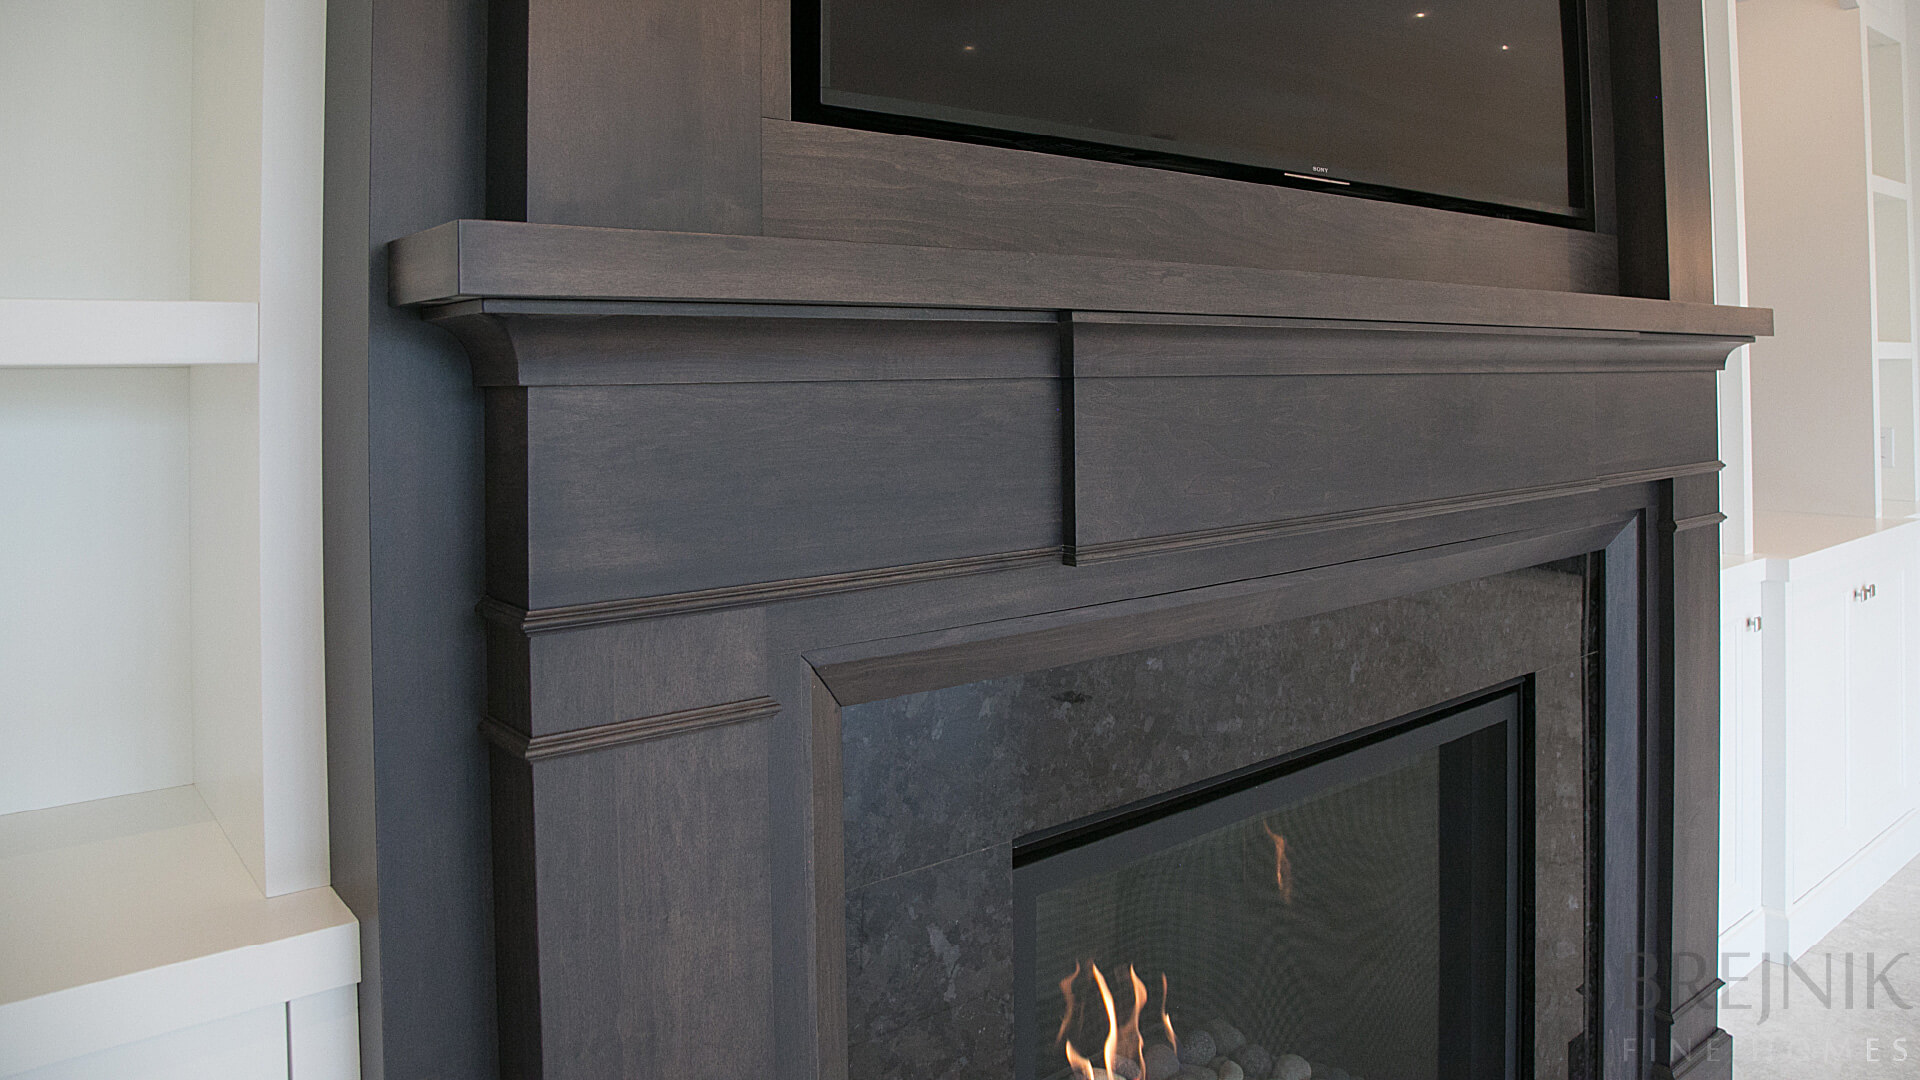 Close up view of a fireplace